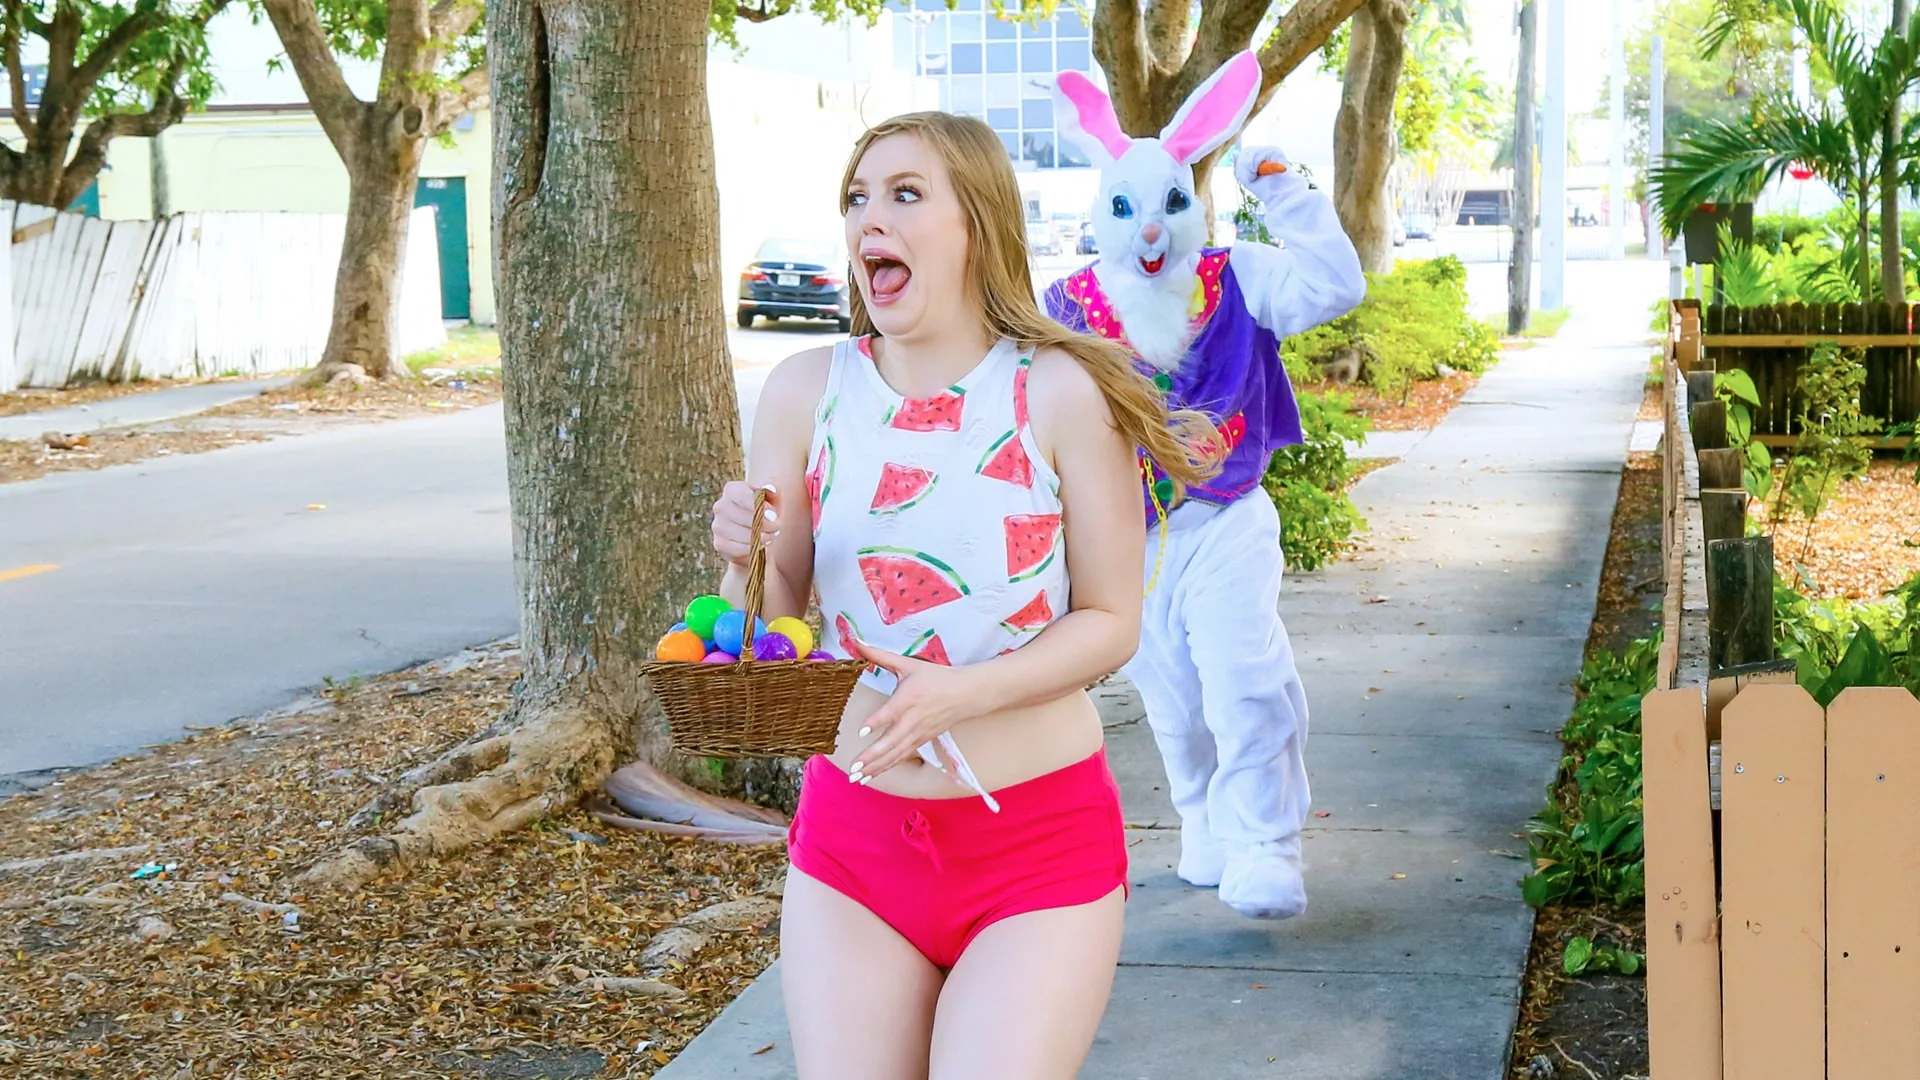 Stealing from the Easter Bunny's Basket - Stranded Teens